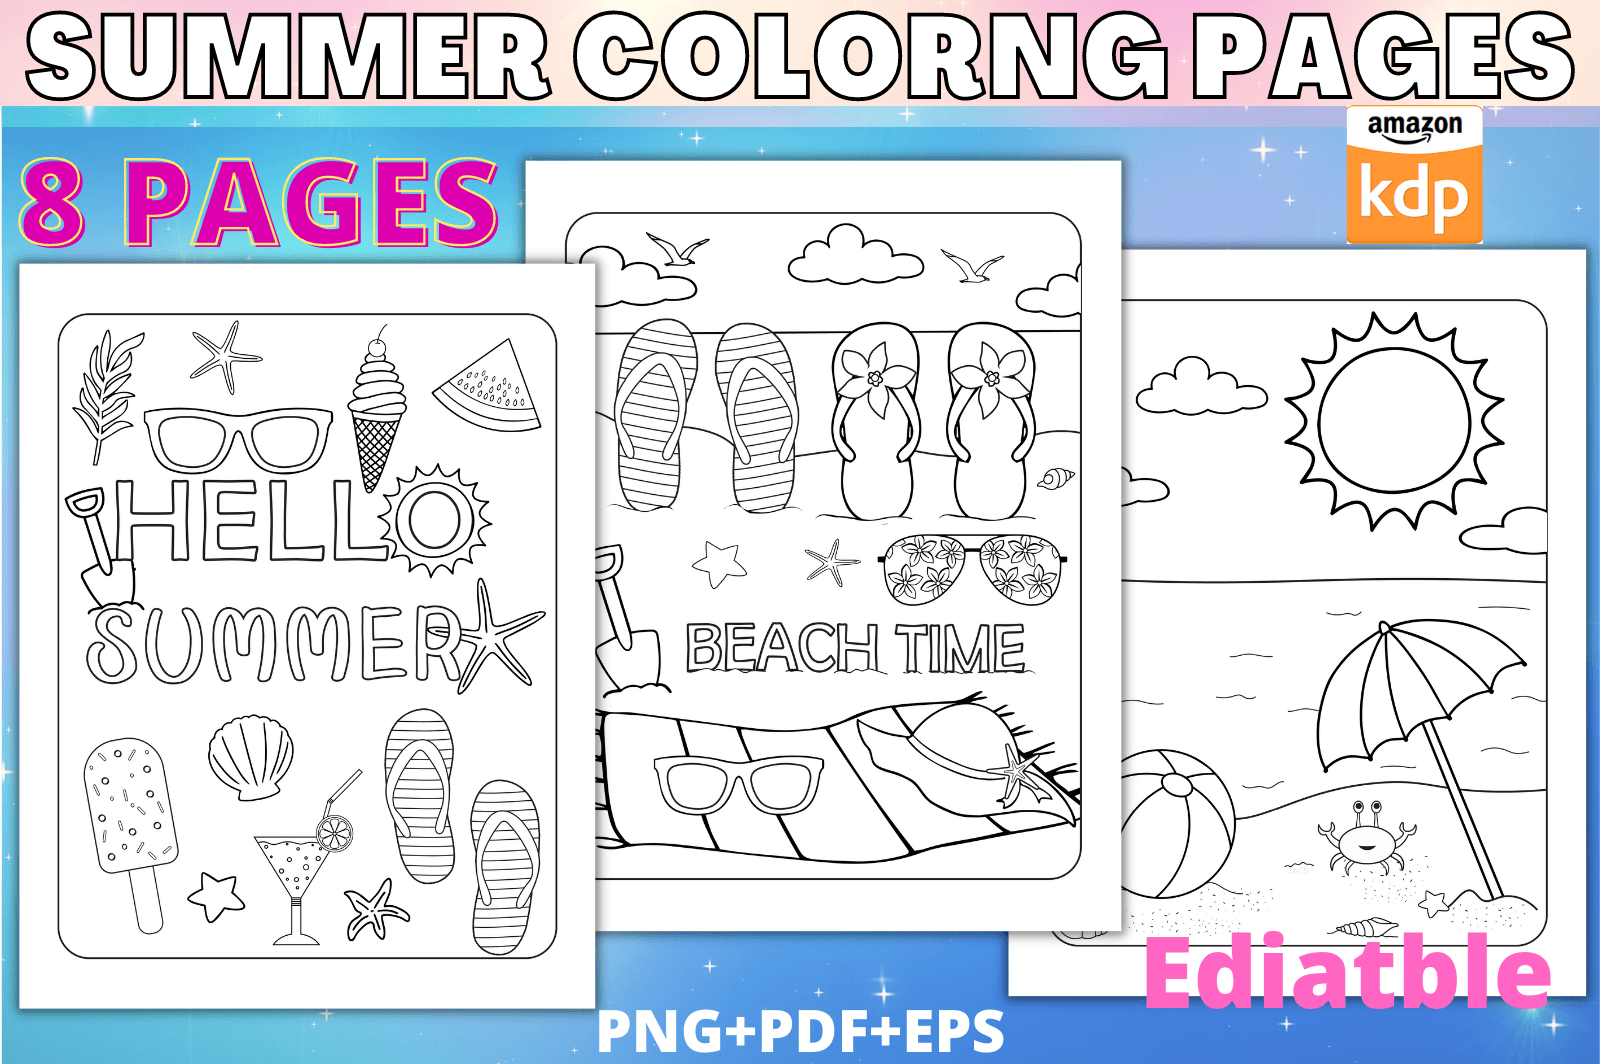 Summer Coloring Pages Original &Editable Graphic by Lelix Art ...